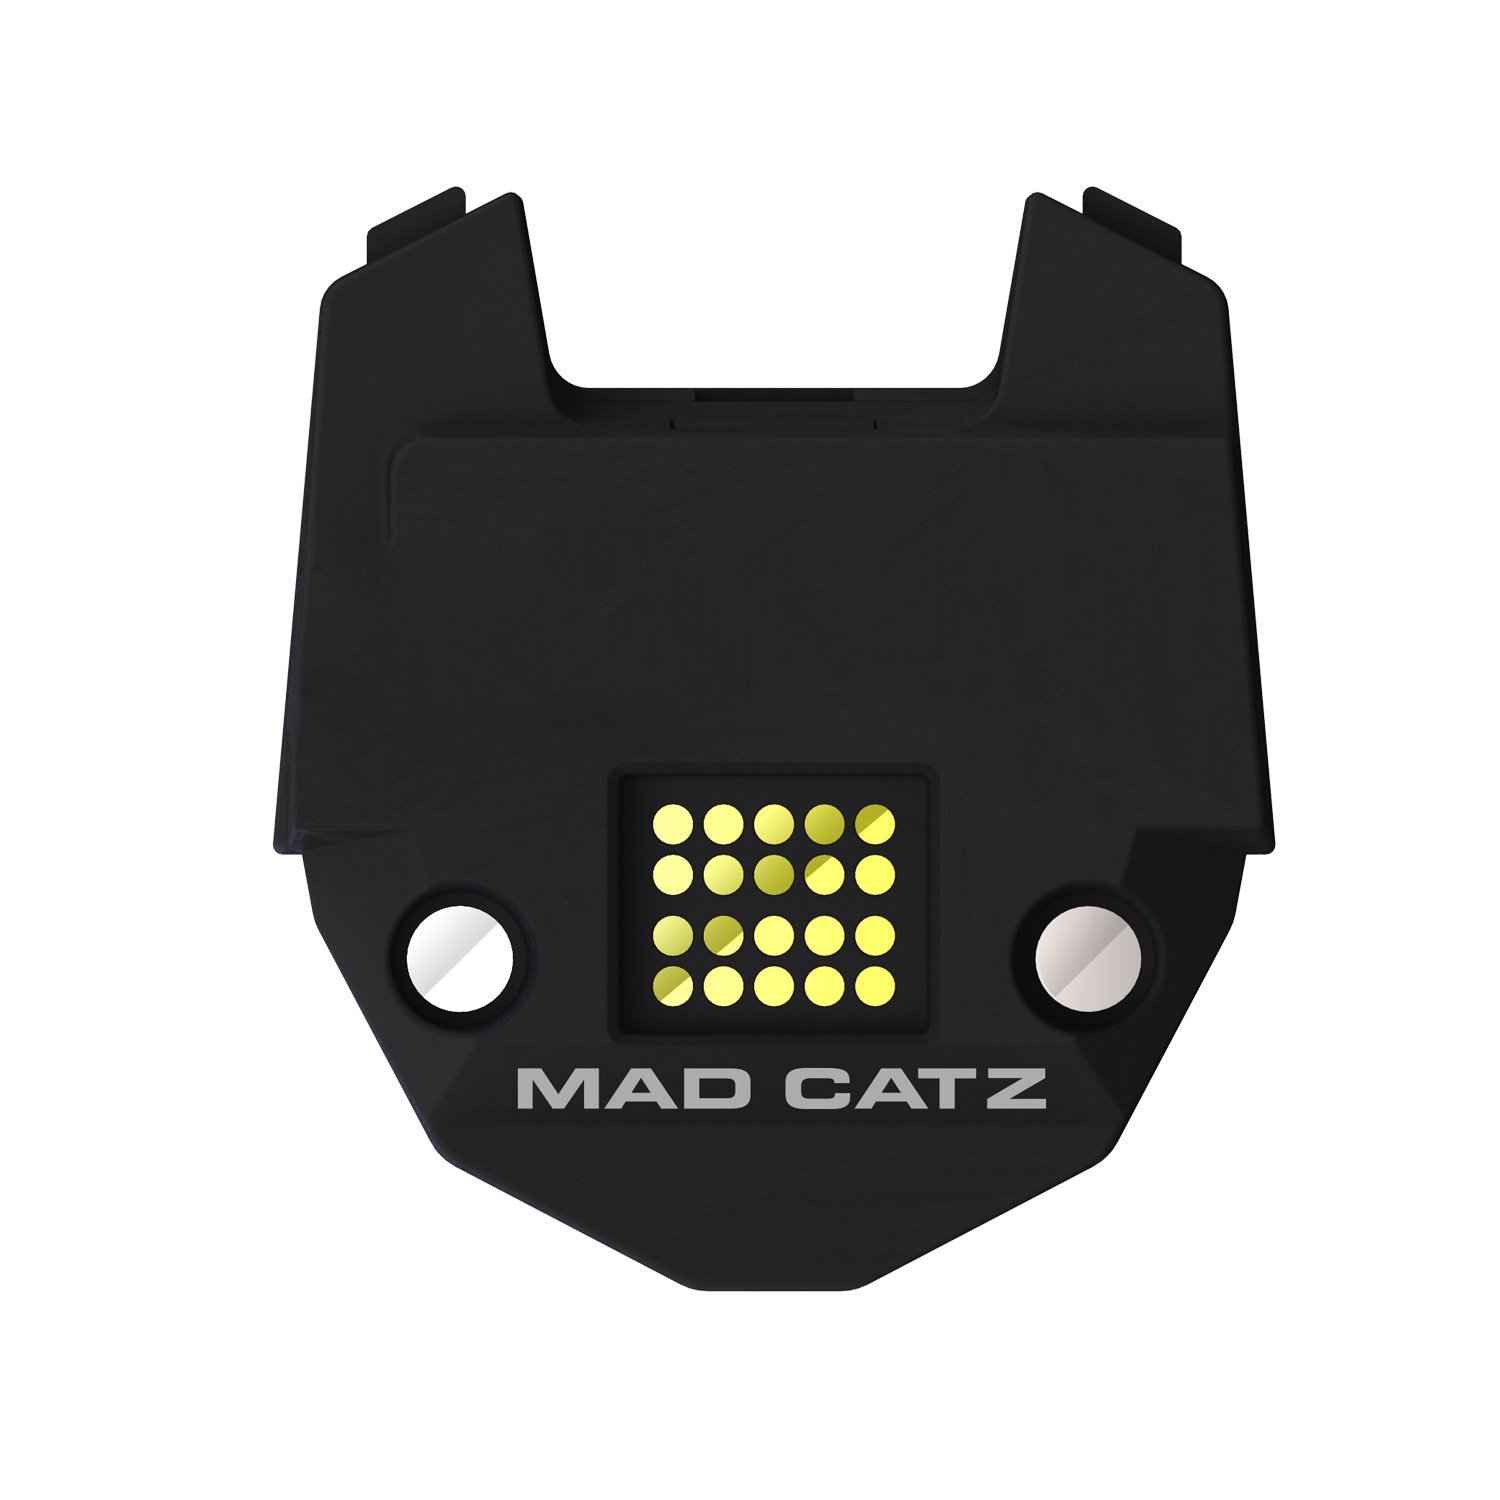 Mad Catz PixArt Optical Sensor Module for Mad Catz R.A.T. PRO X Ultimate Gaming Mouse (MCB4372300X2/50/1) - image 2 of 3